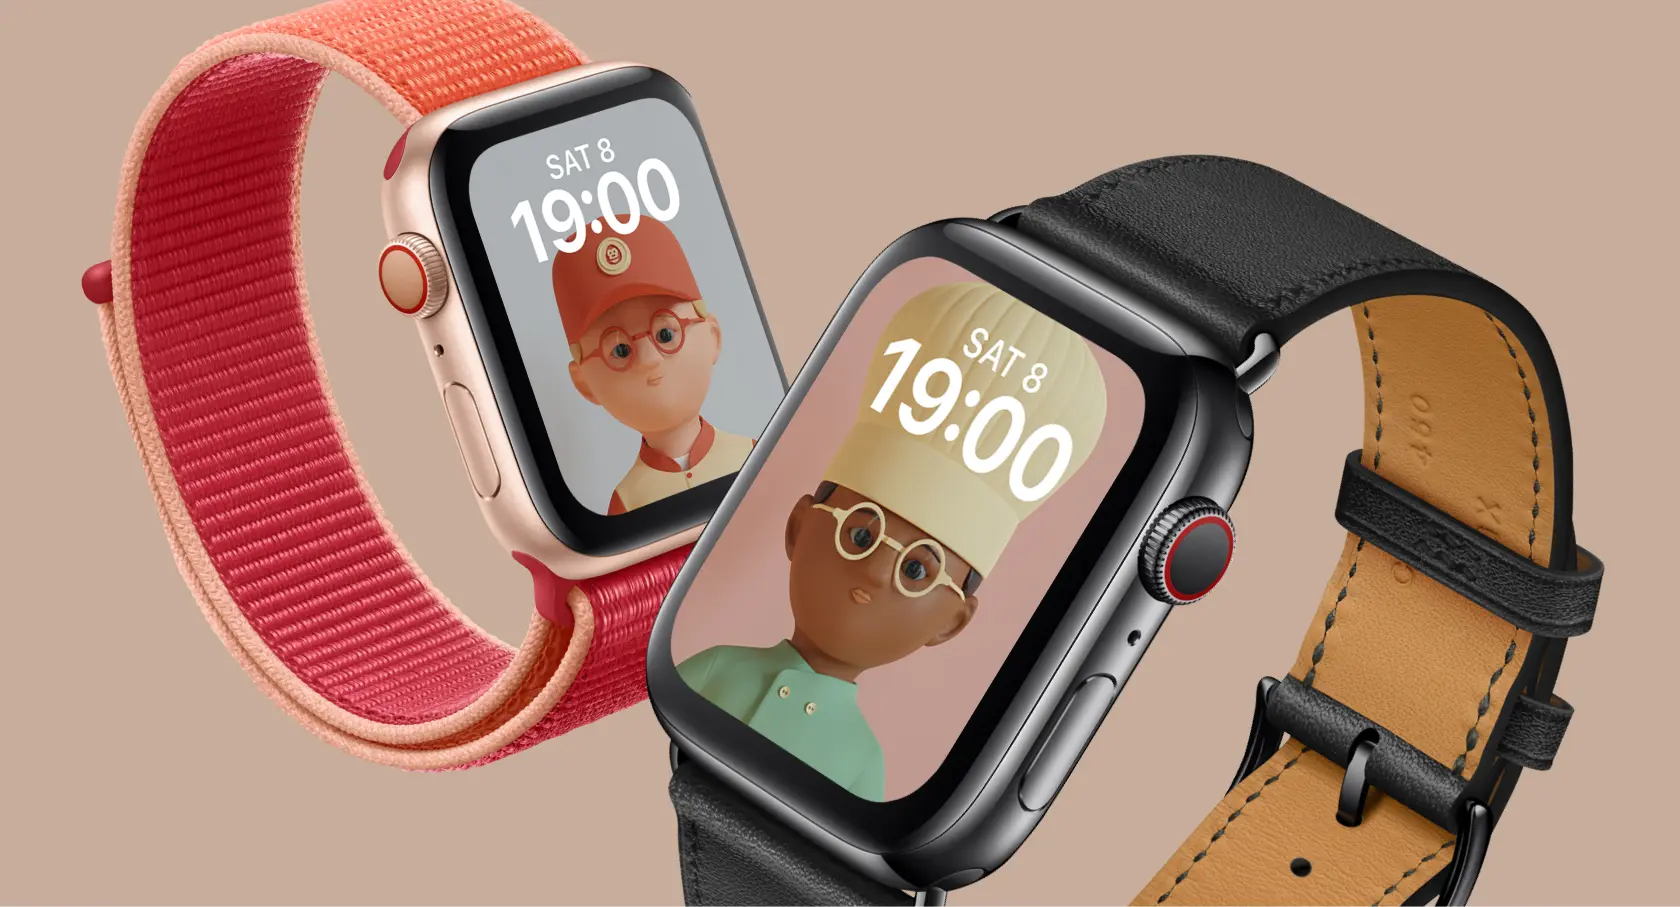 Two smartwatches with digital avatars on display, one with a red strap, the other with a black and tan strap.